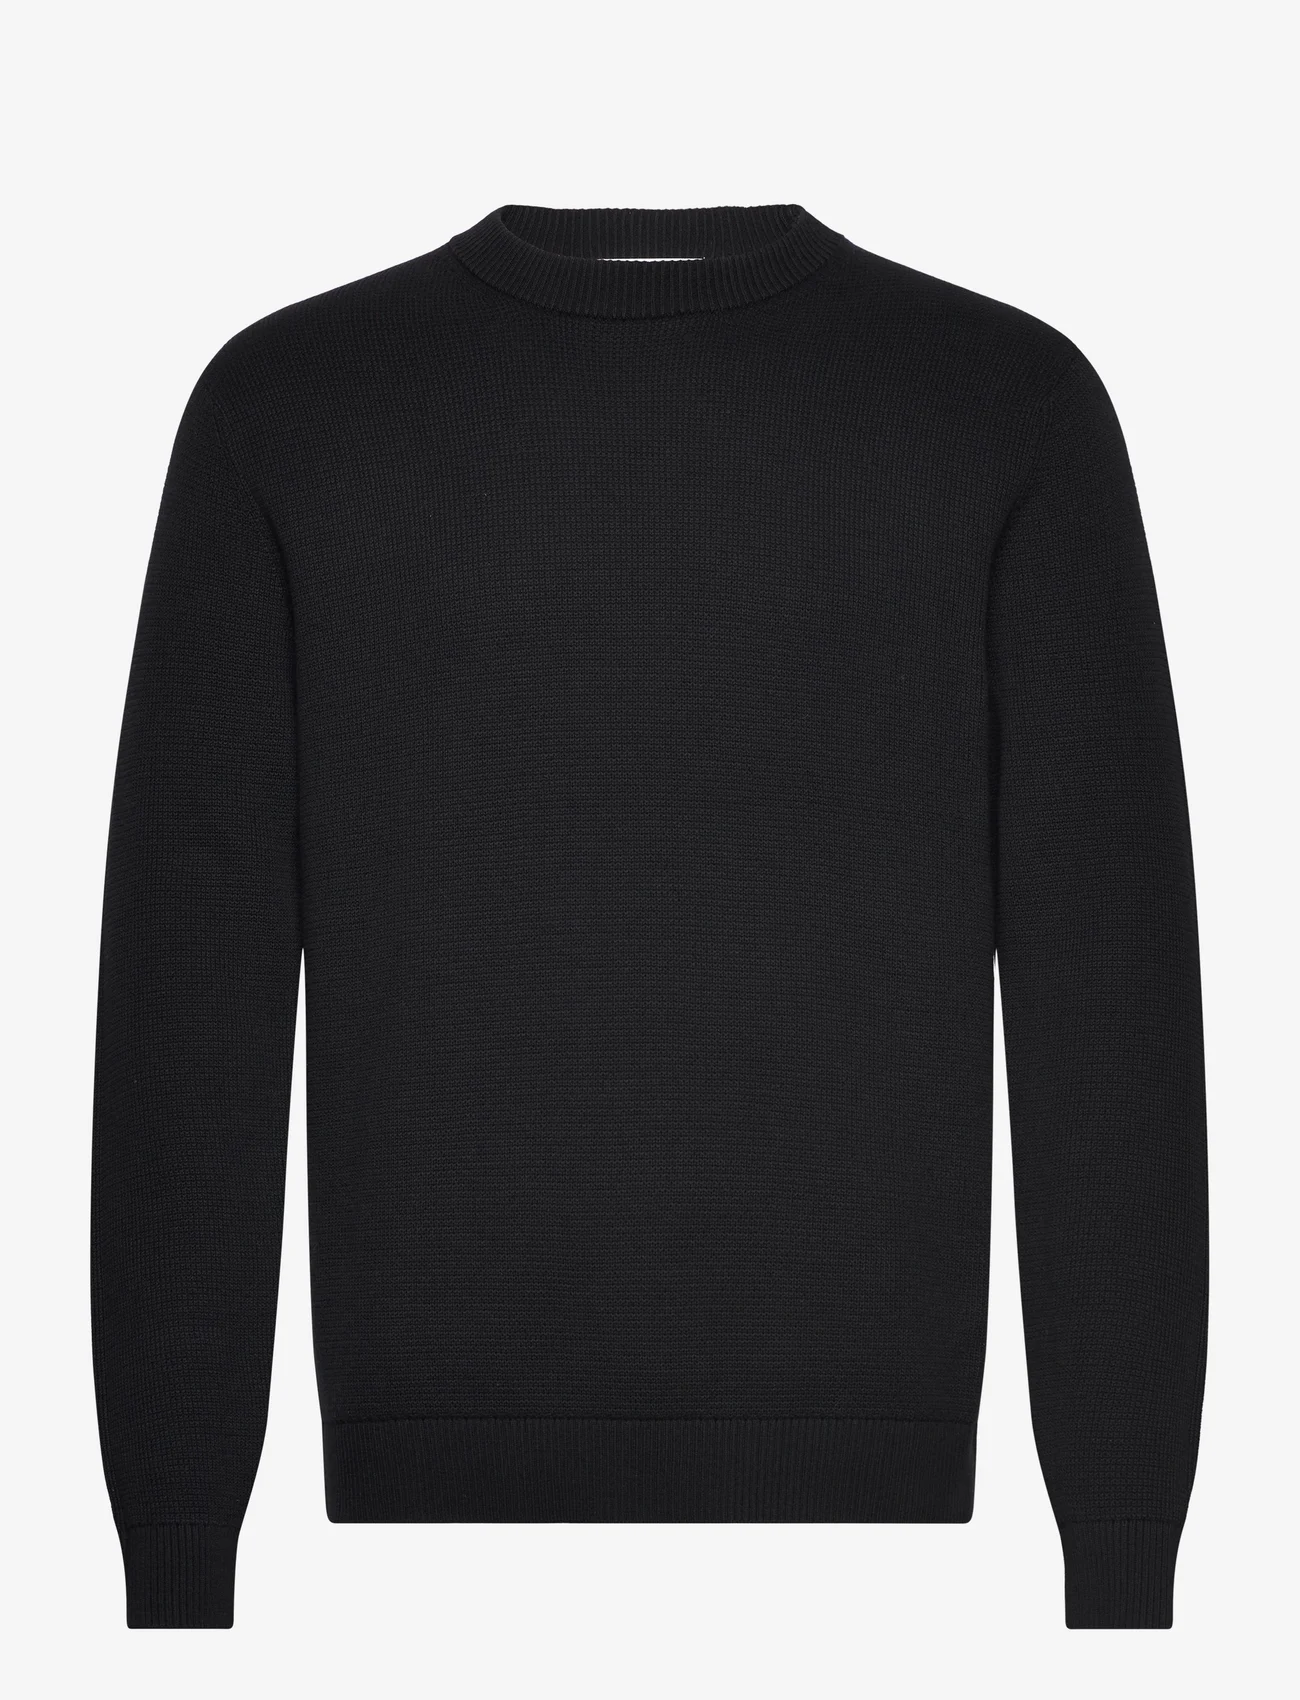 Selected Homme - SLHDANE LS KNIT STRUCTURE CREW NECK NOOS - rundhals - black - 0